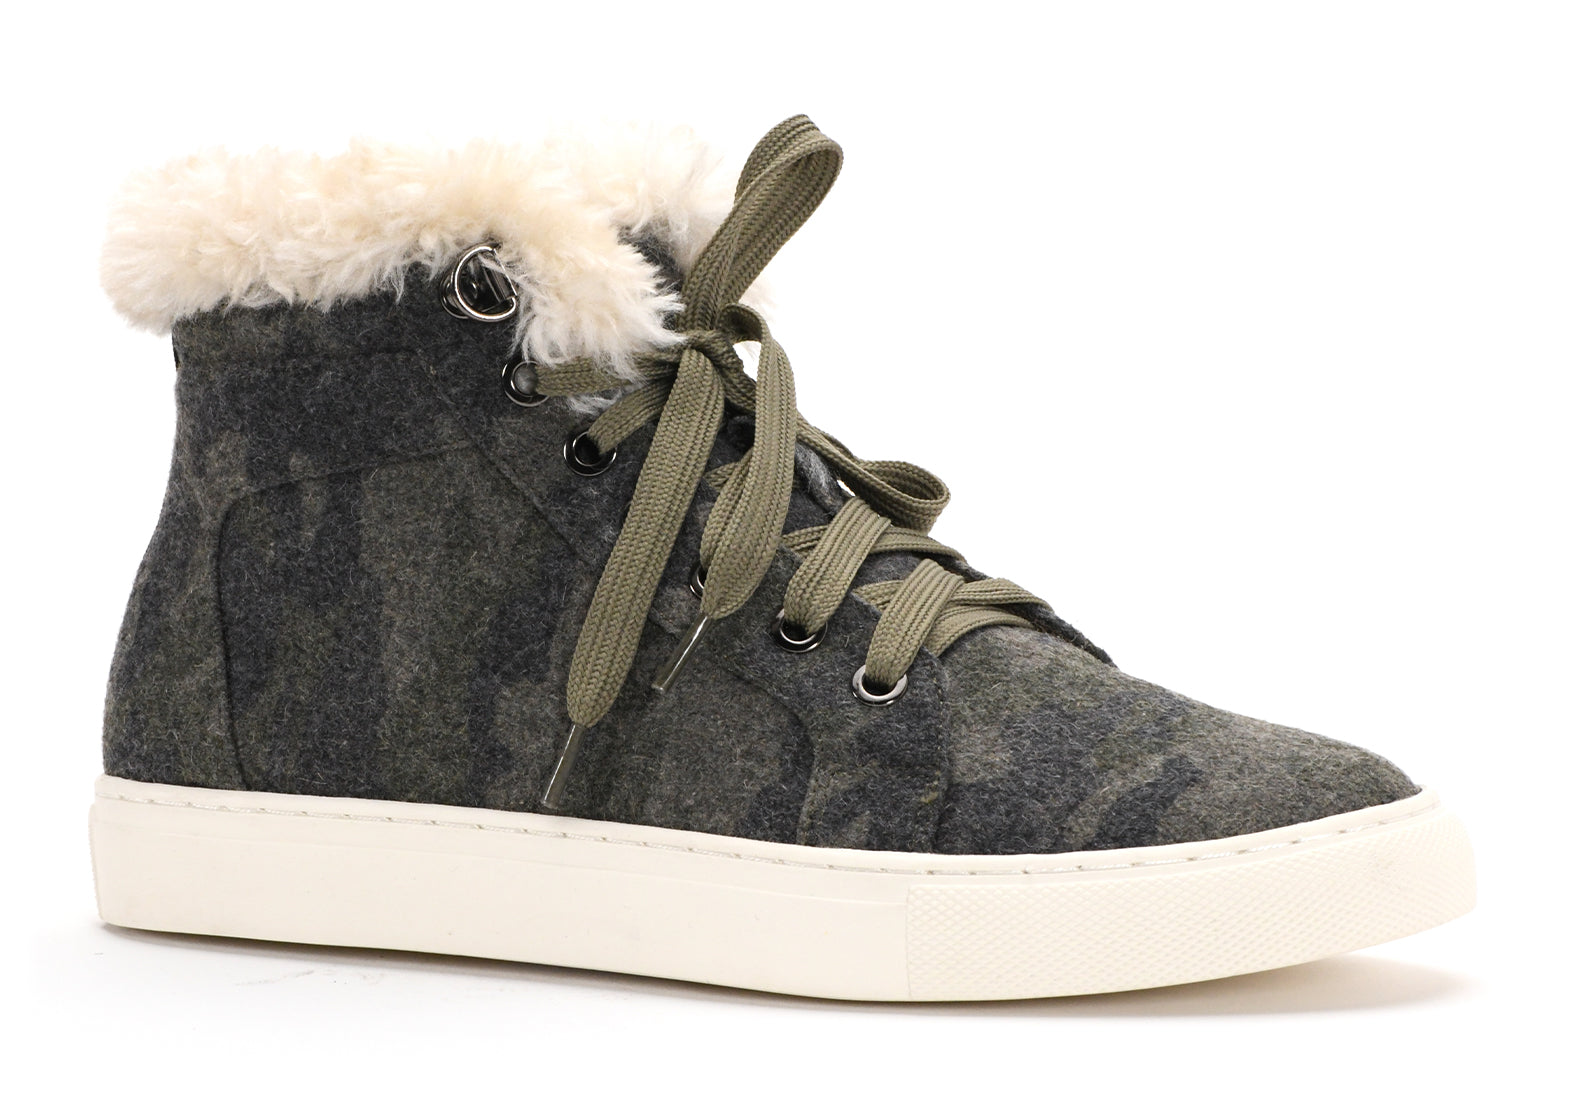 Corkys Shoes - Templin Camo Lace Up High Top Sneaker/Boot  SALE 40% OFF NOW $24.95